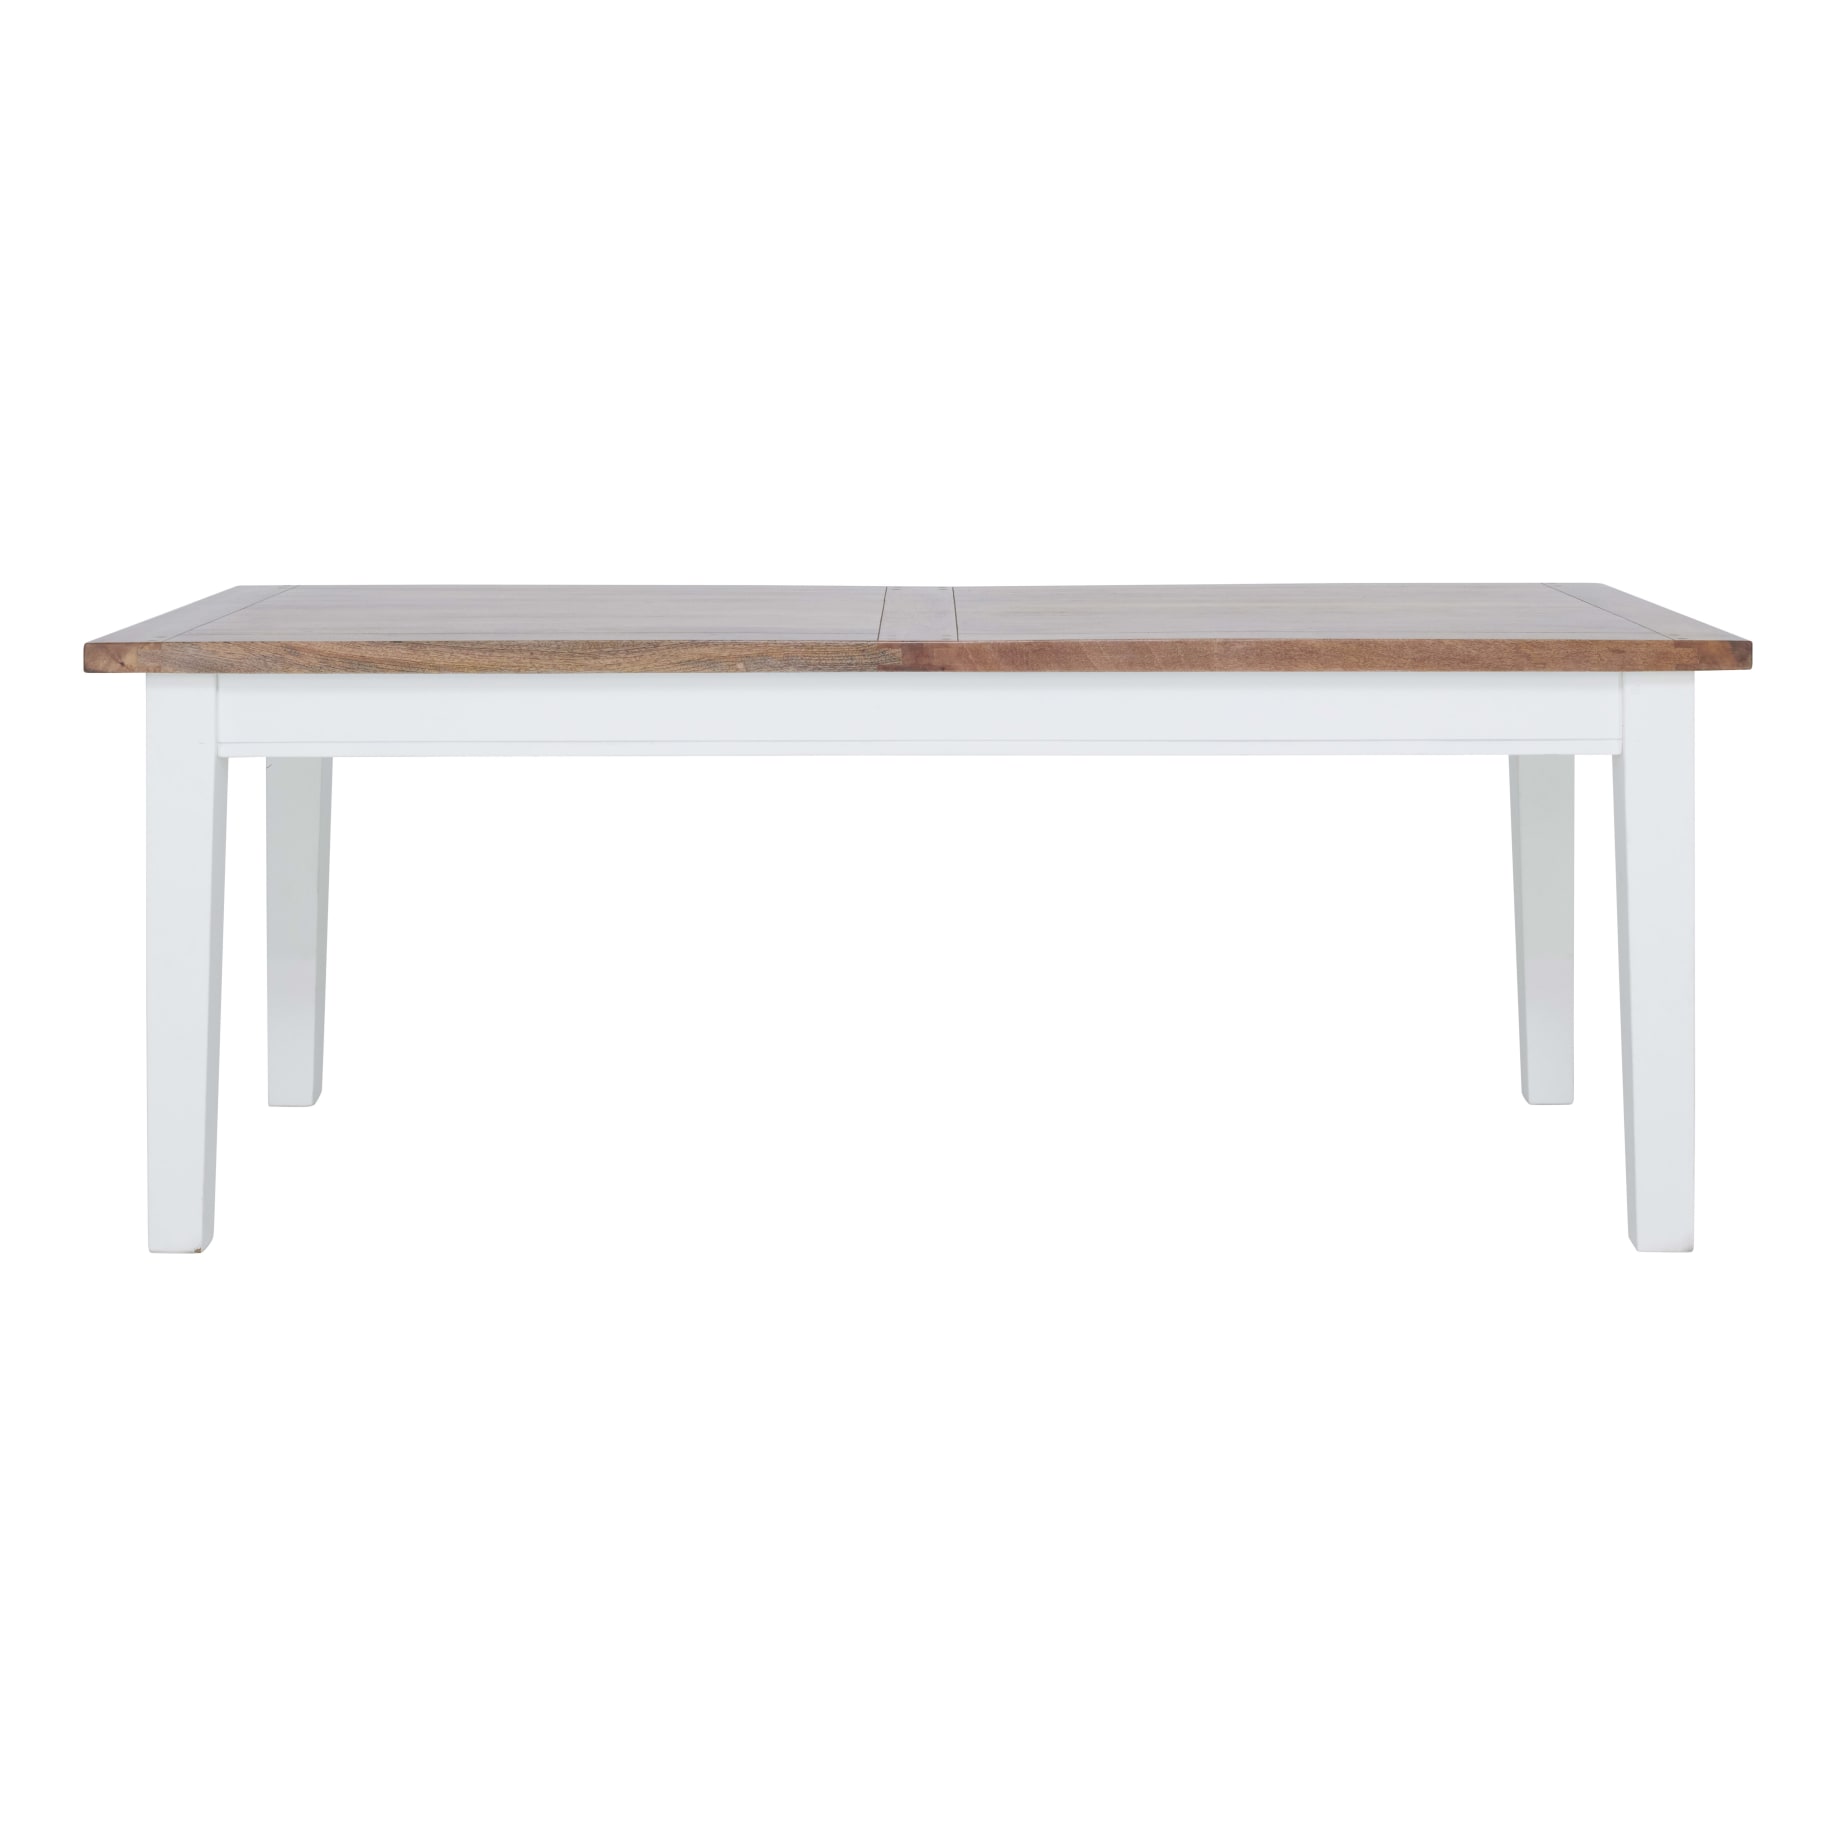 Mango Creek Dining Table 250cm in White / Clear Lacquer